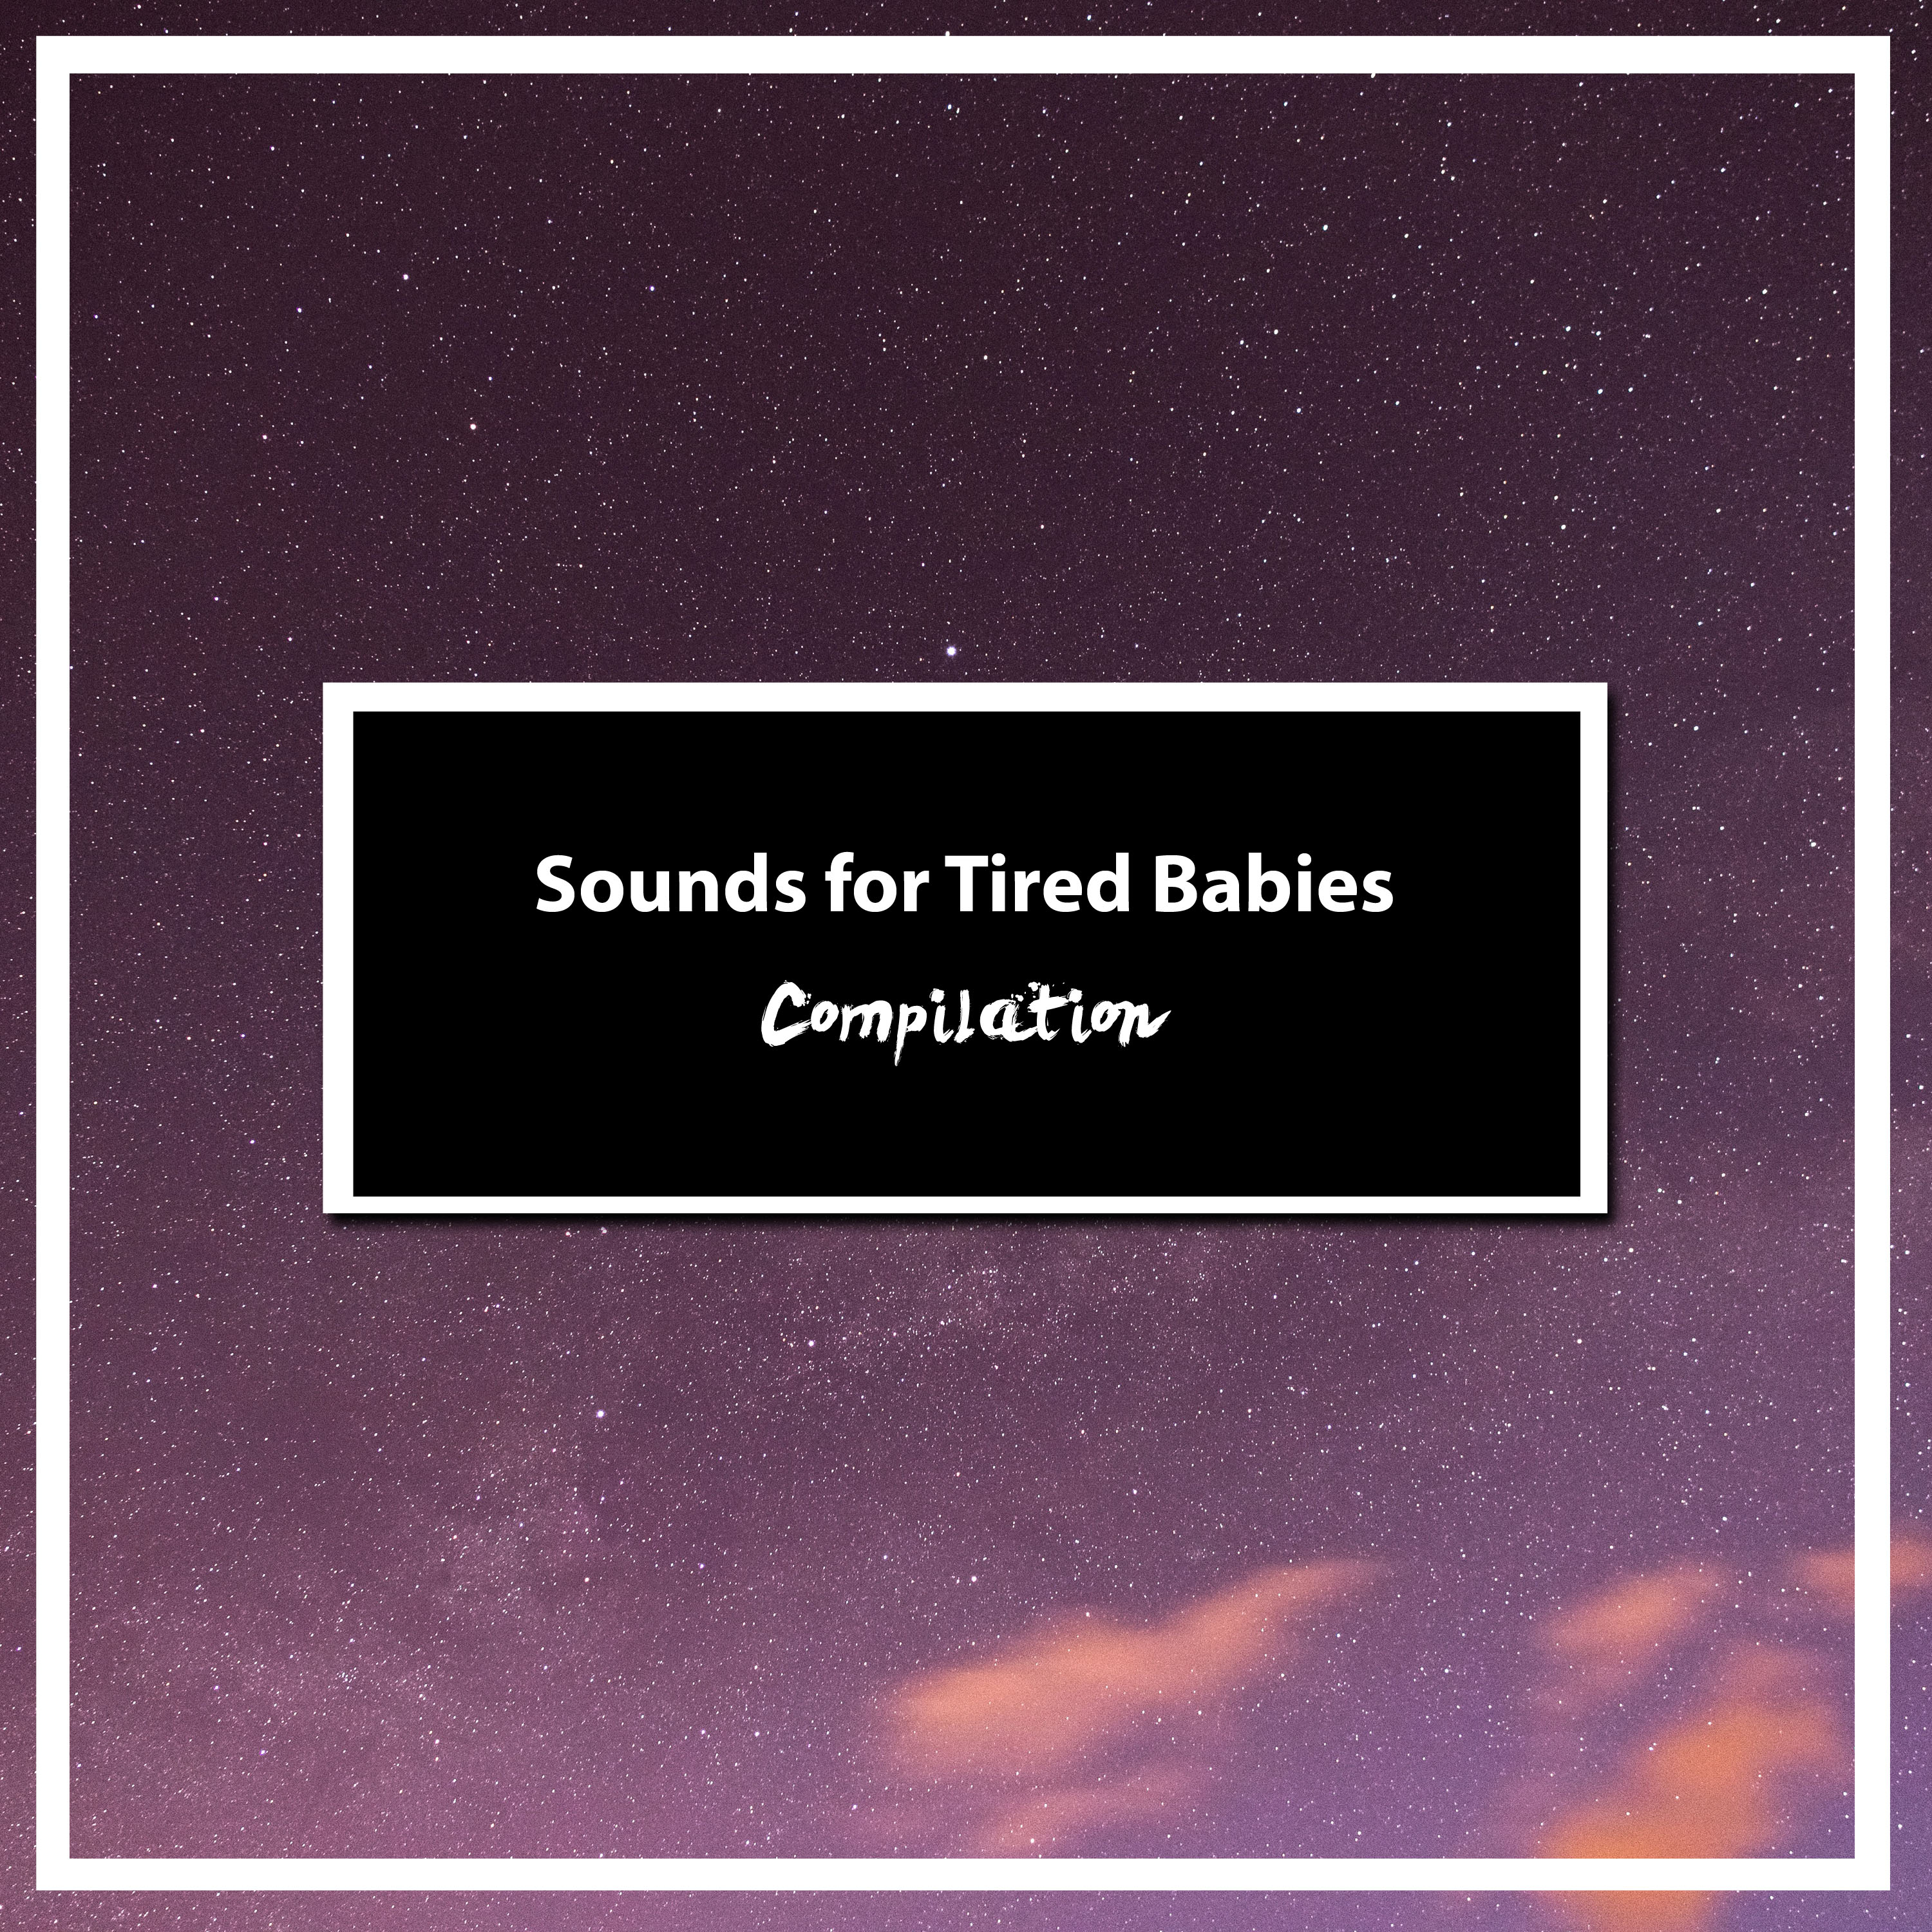 2018 A Sounds for Tired Babies Compilation